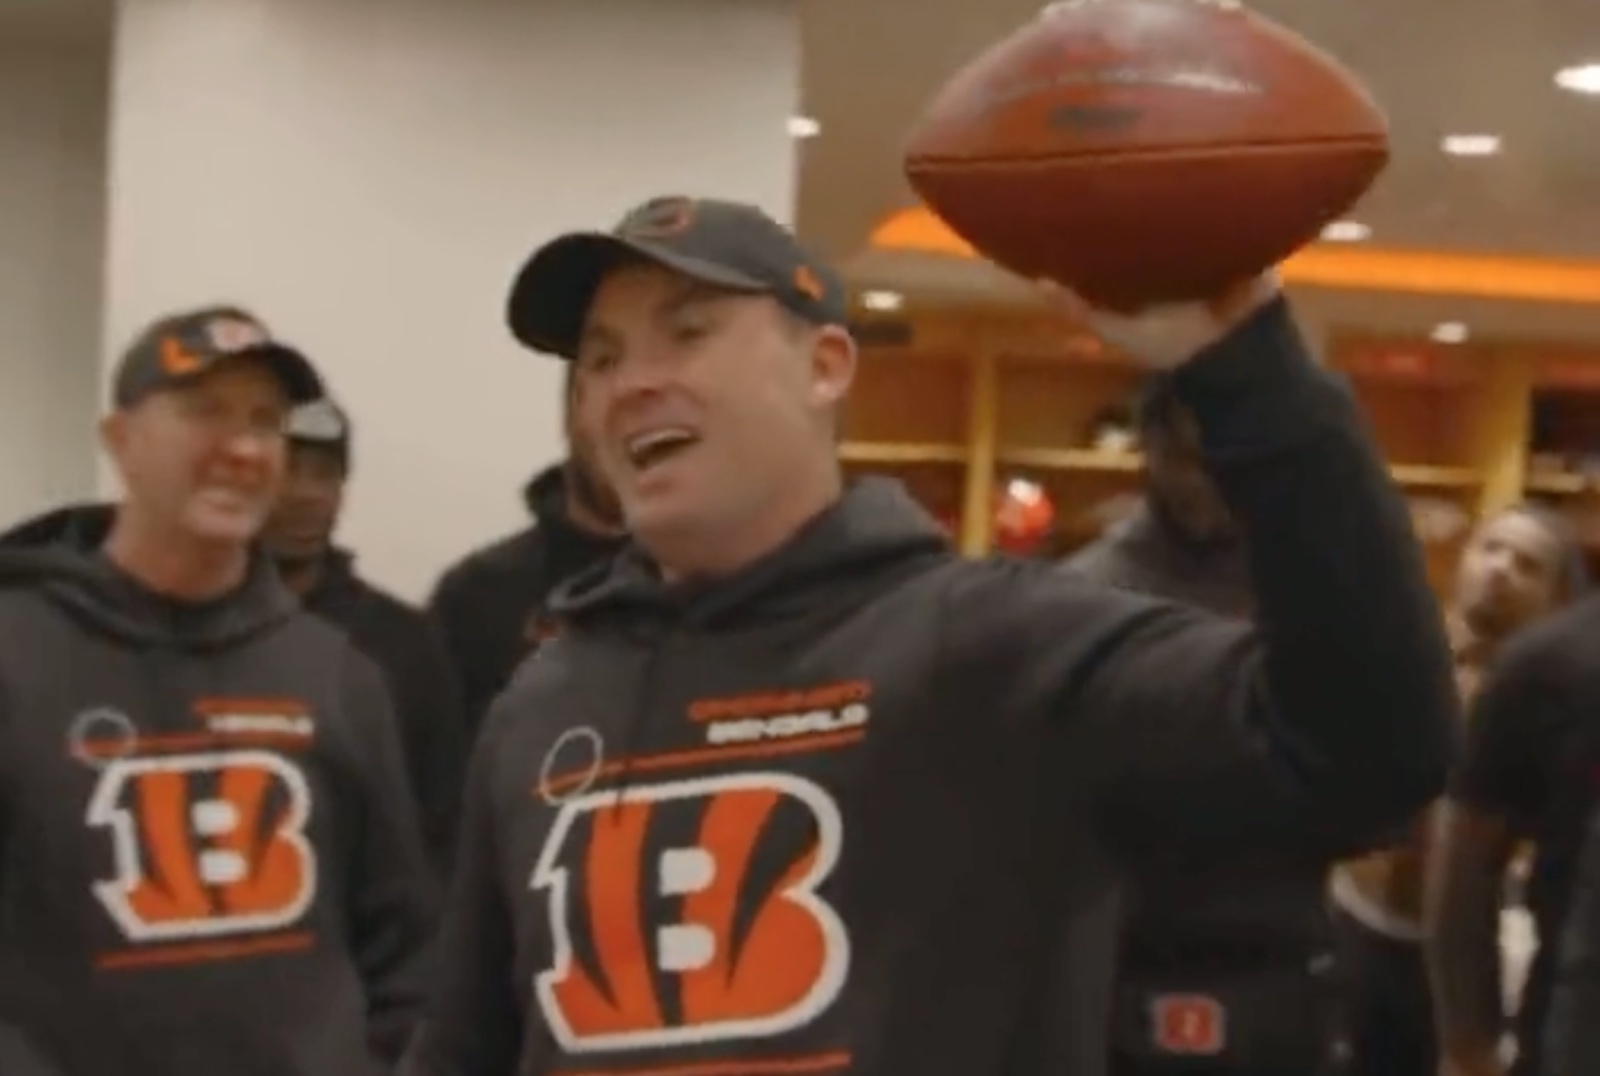 Game ball tradition grows with Bengals' postseason success